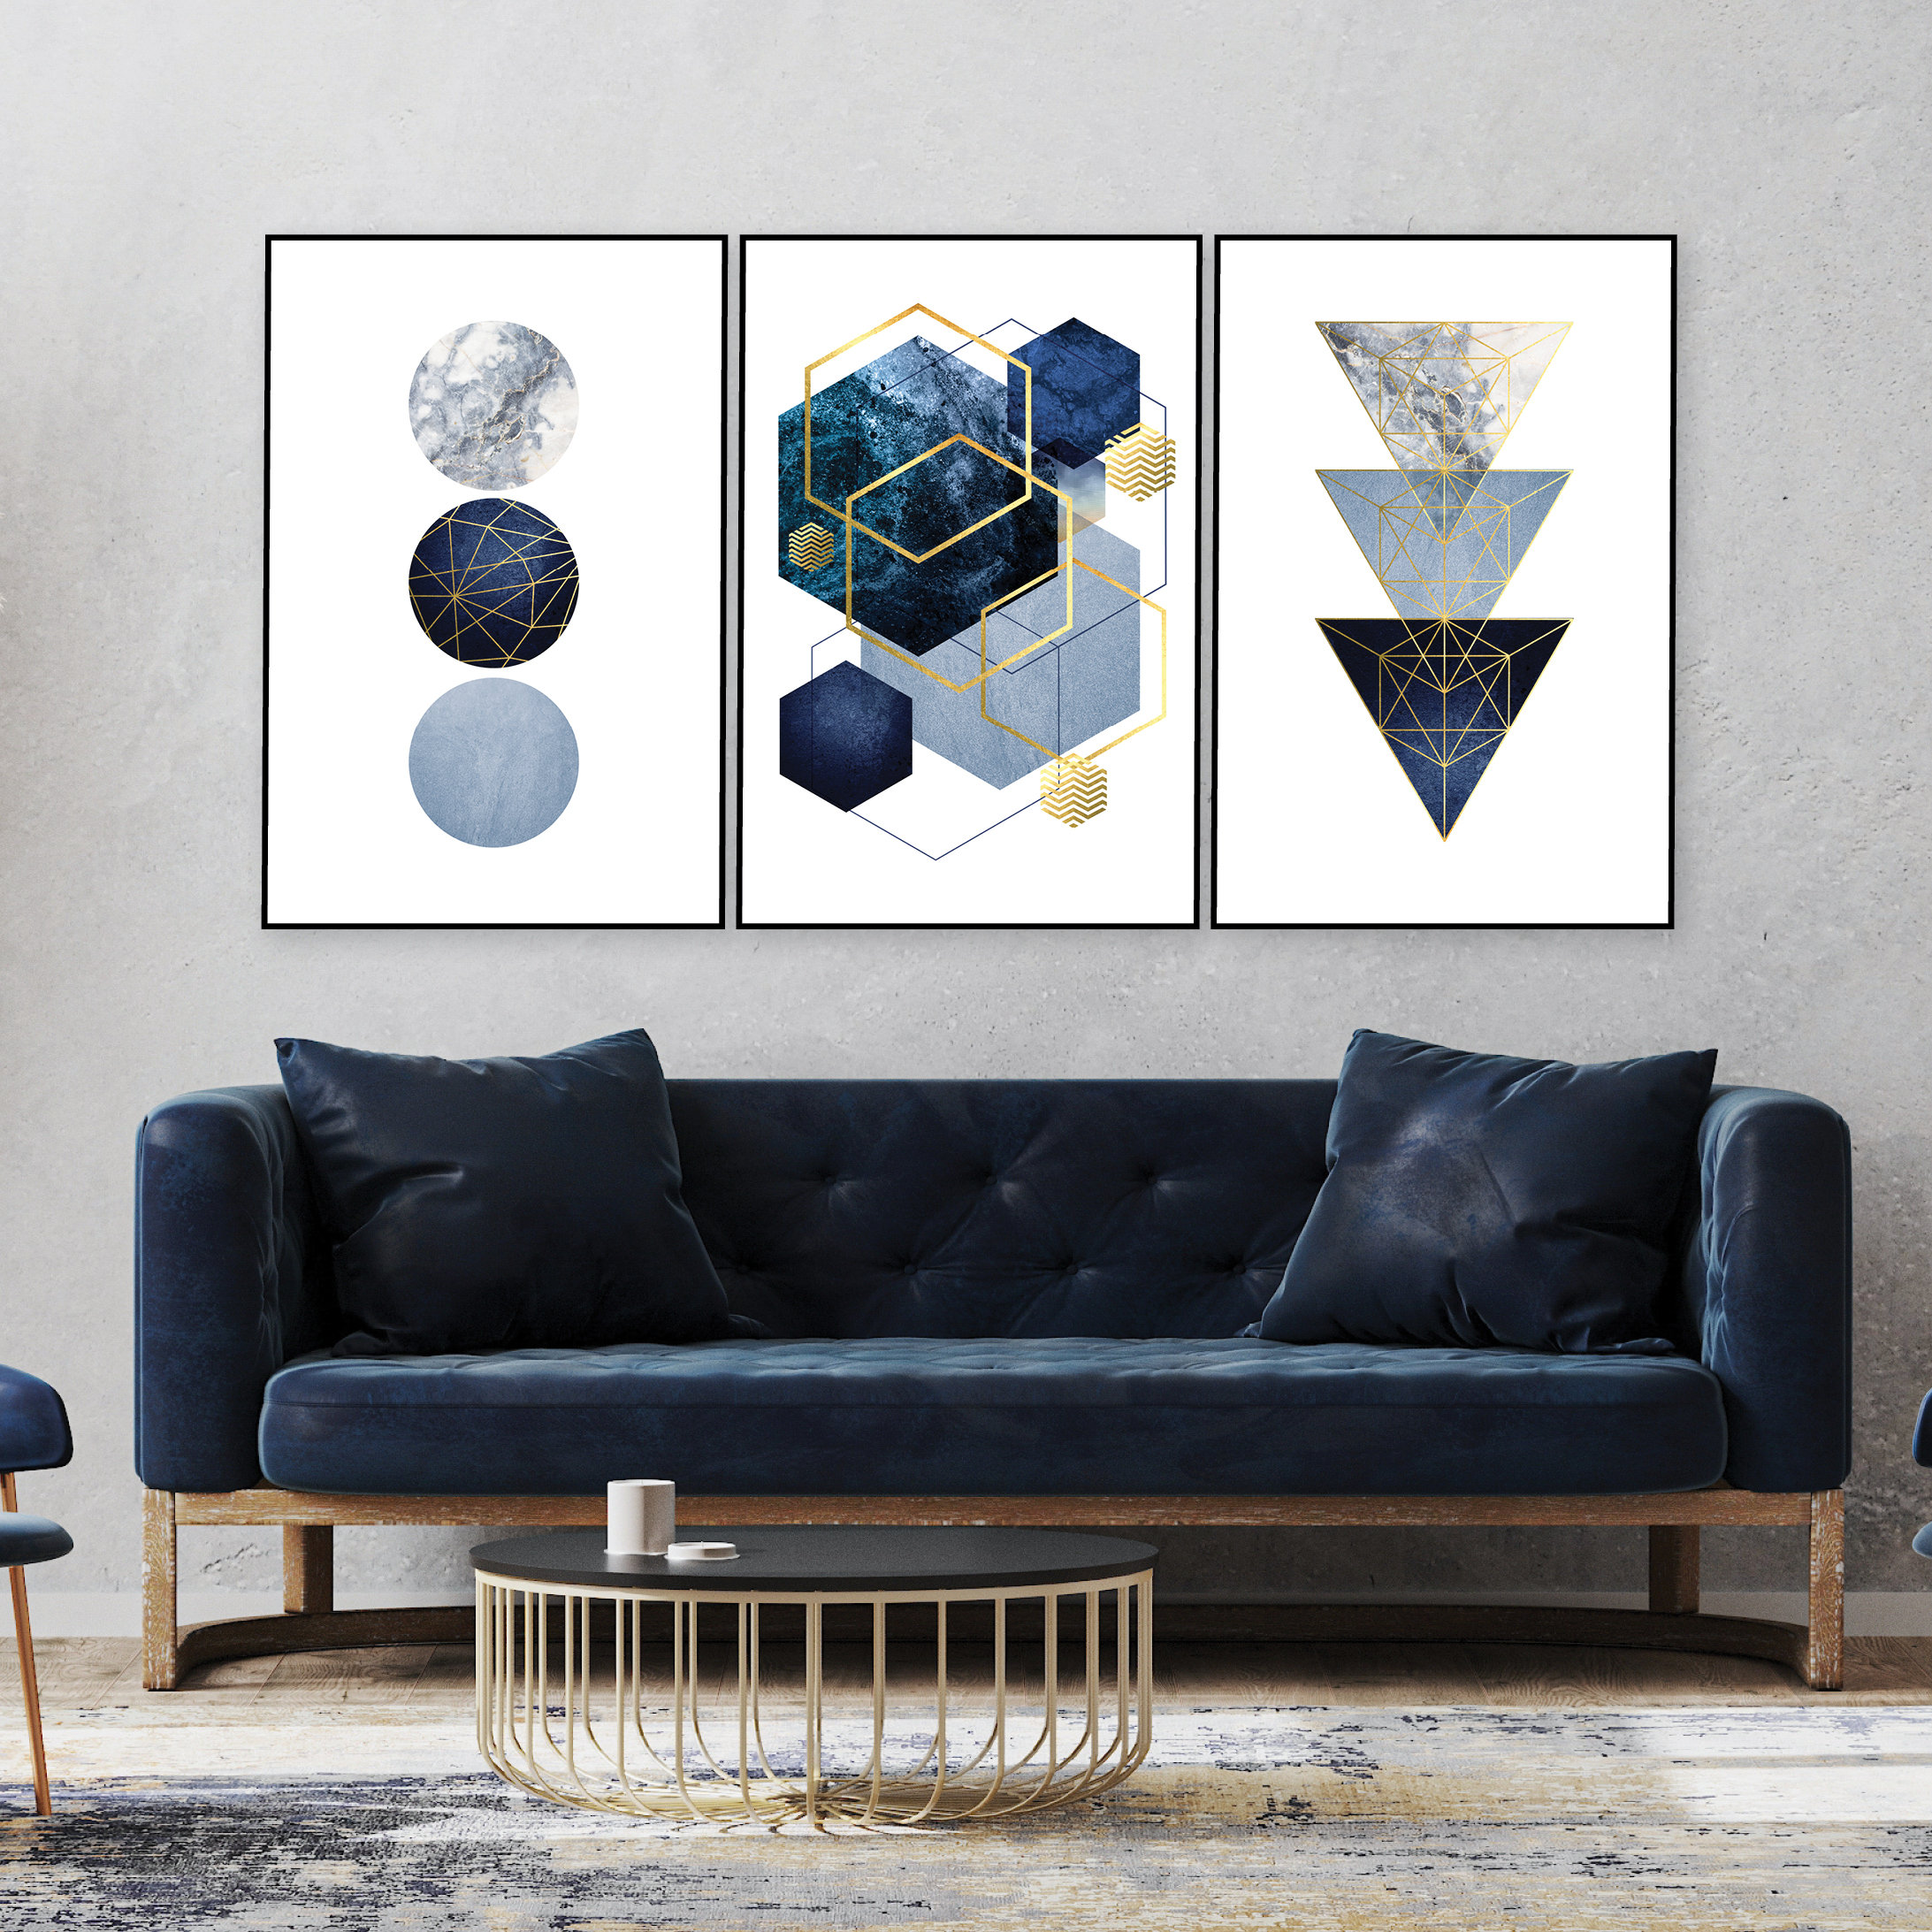 Minimalist Gold Printable Navy of 3 - A1 Download Digital Download Etsy Posters Decor Geometric Wall Downloadable Instant Set Art Blue Art Prints